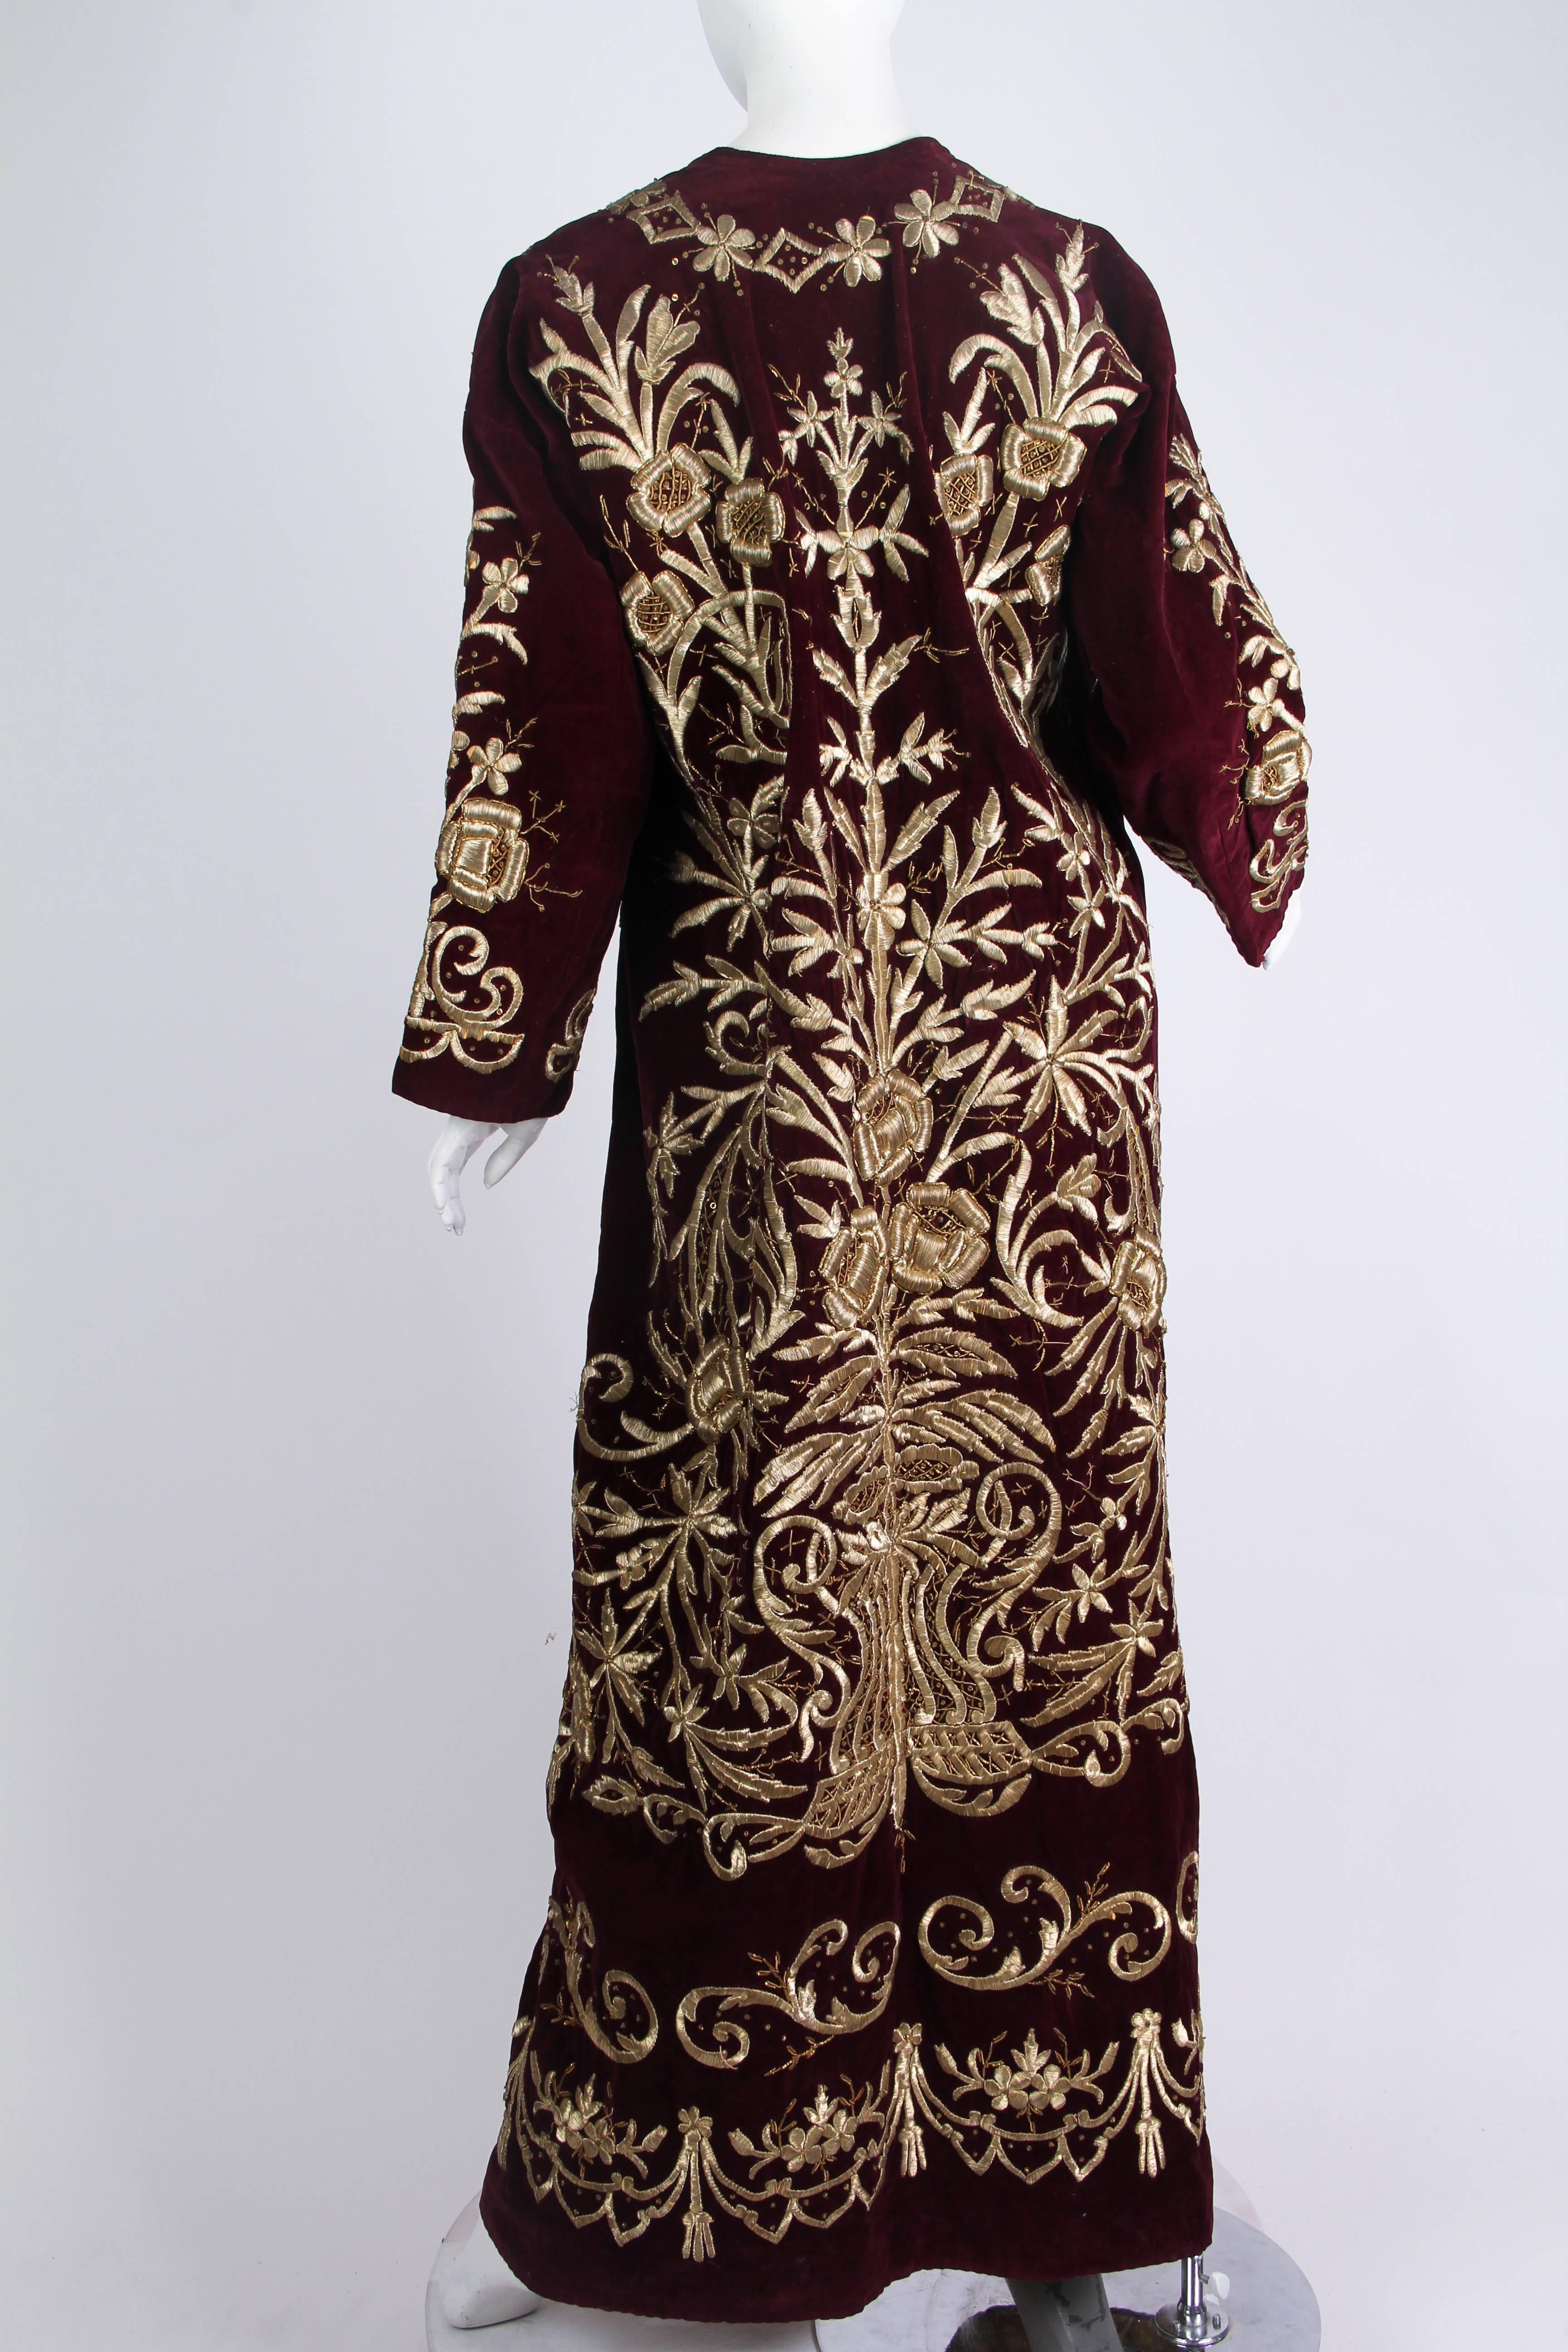 velvet dress with gold embroidery